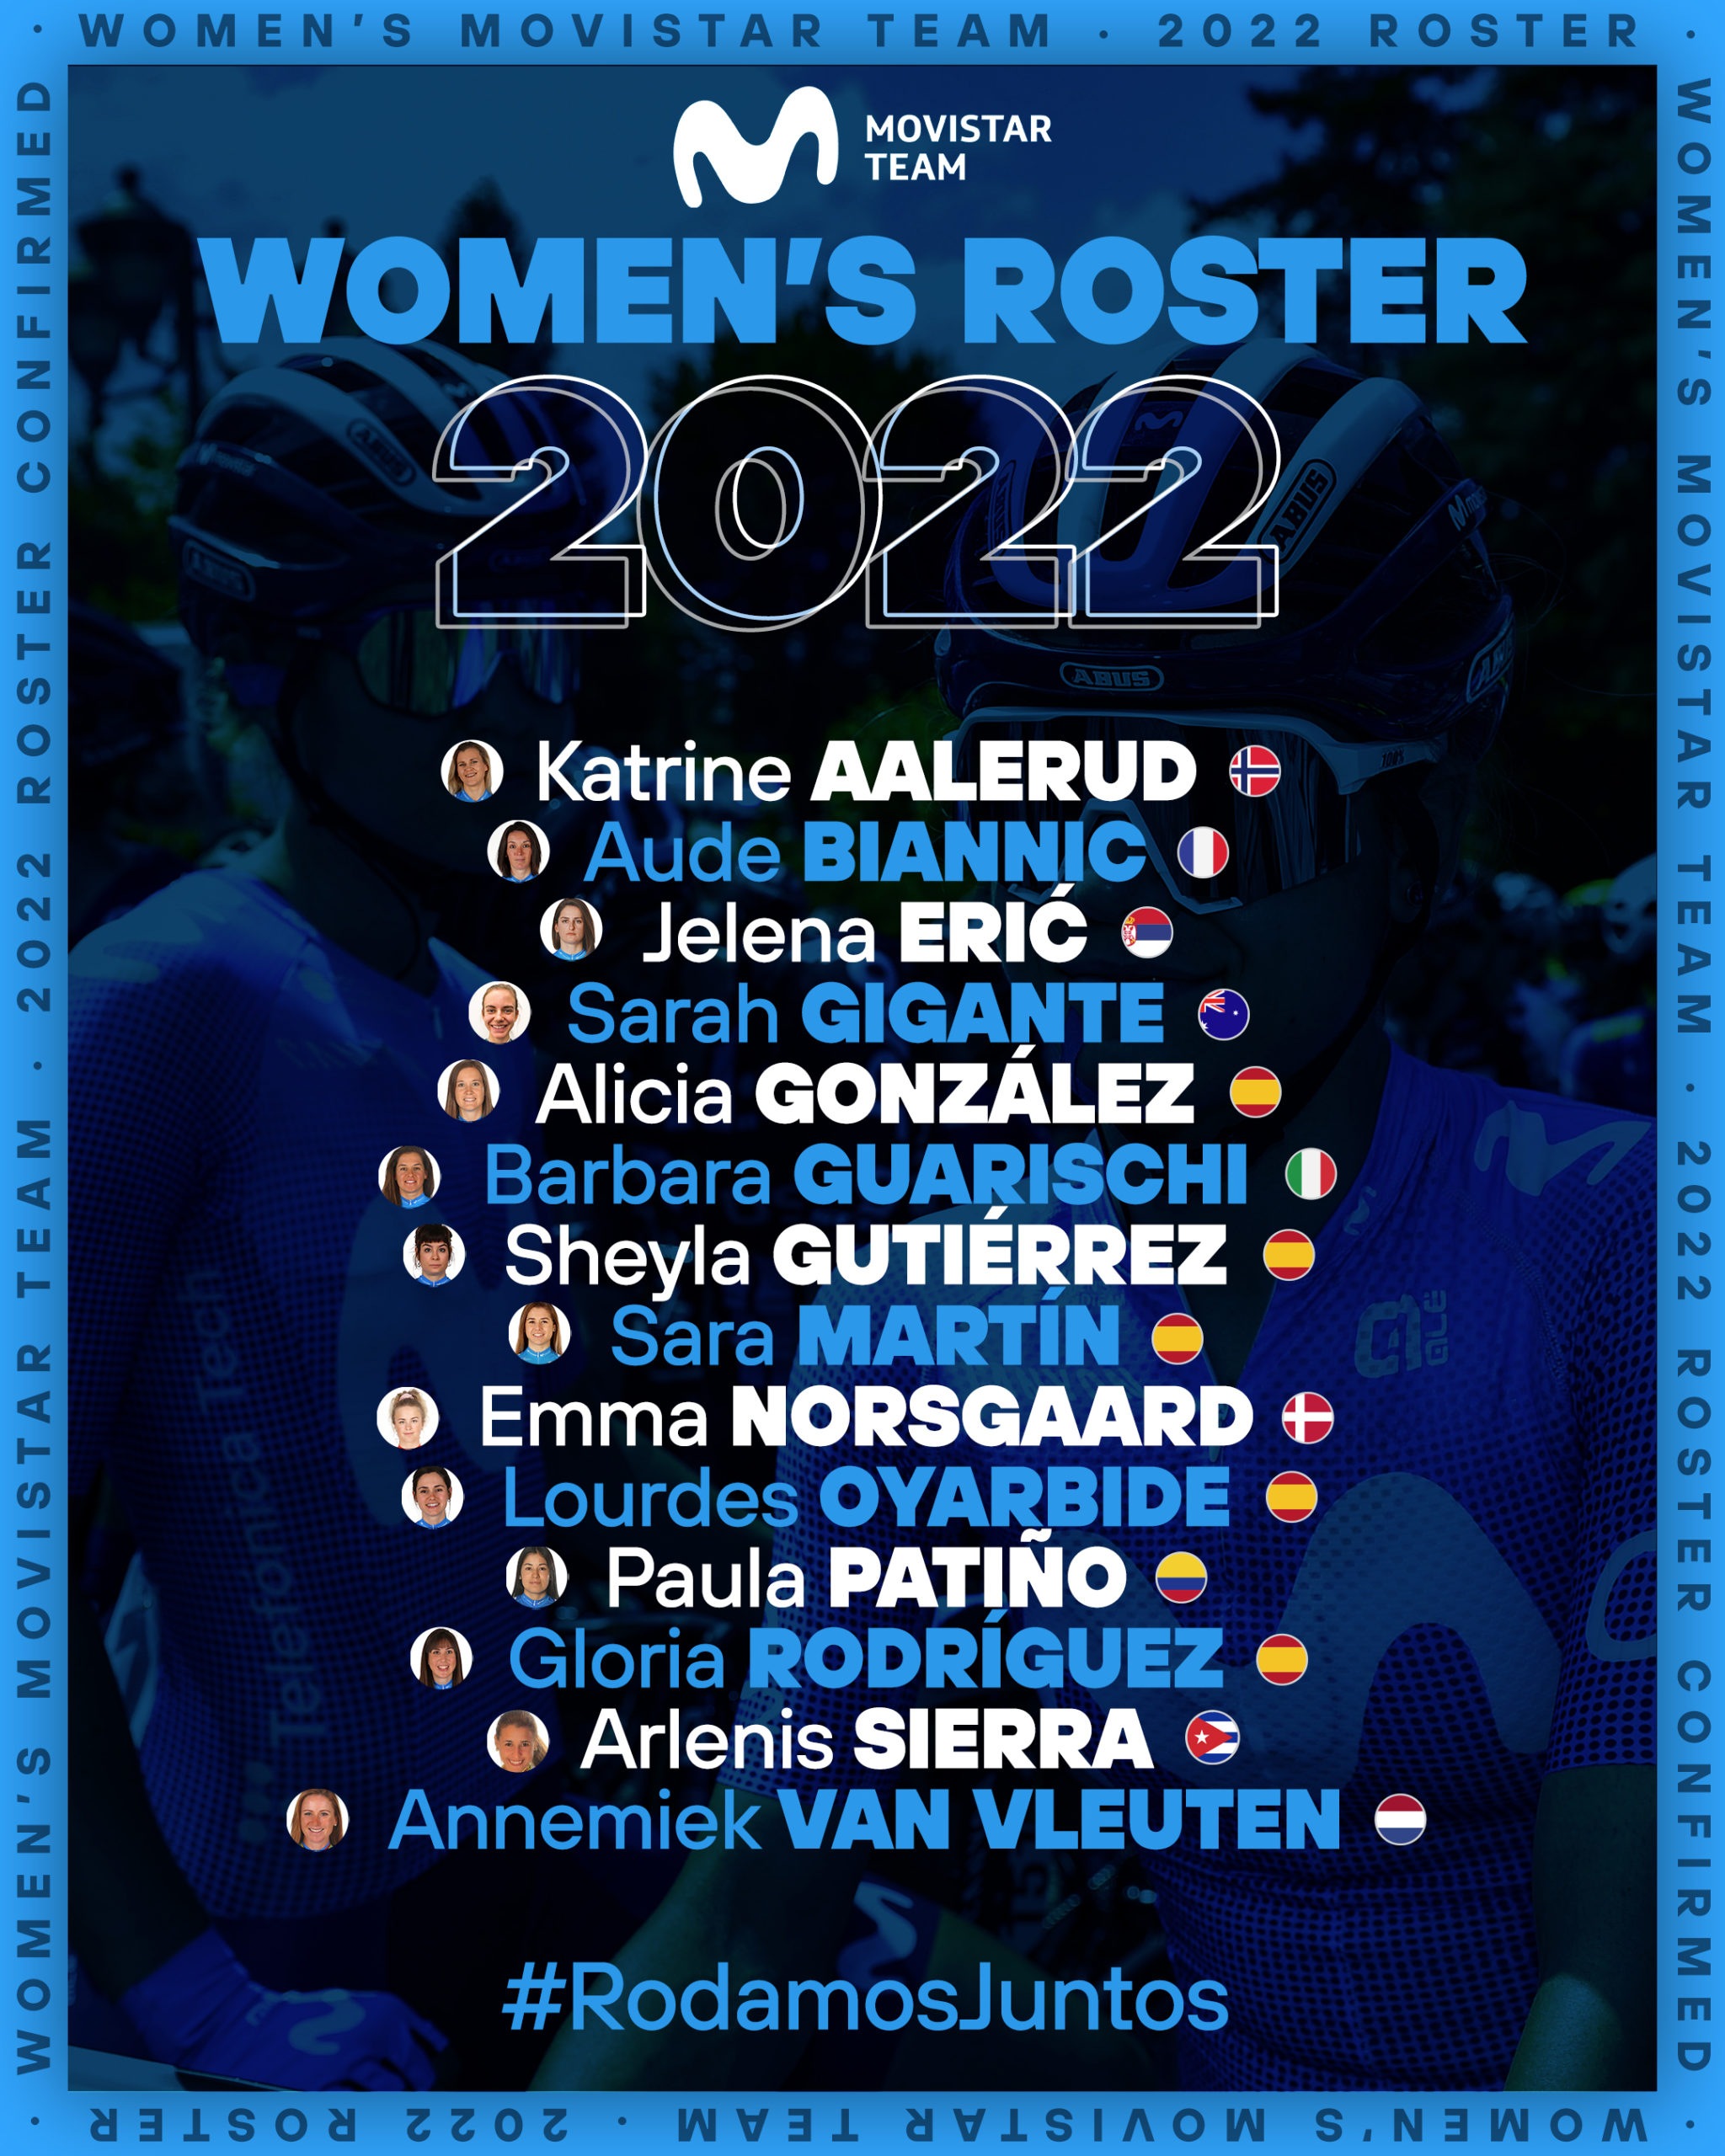 An even stronger female Movistar Team in 2022: 14 riders, with Arlenis Sierra